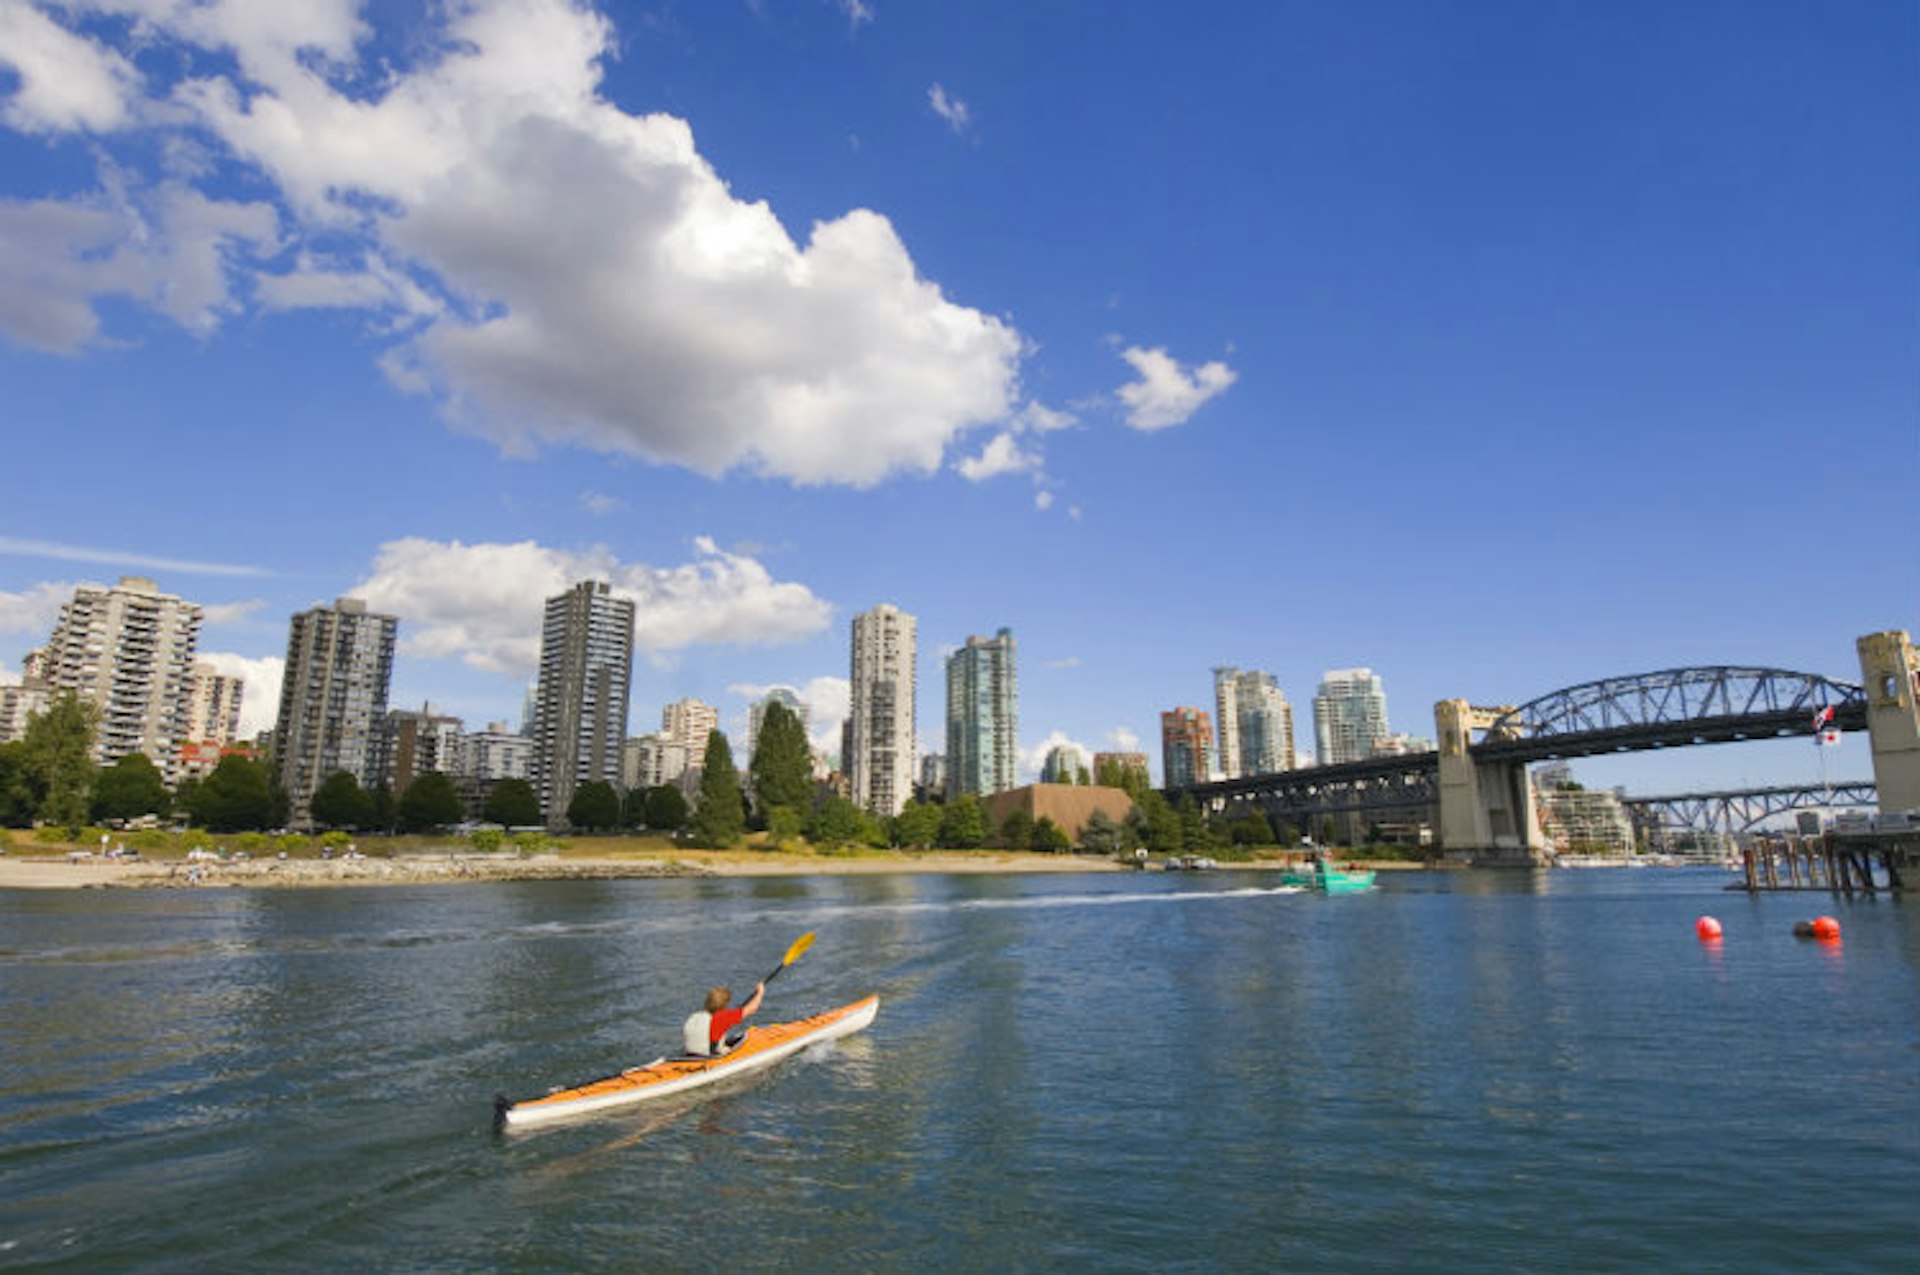 A paddle down Vancouver's False Creek is a great way to see the city. Image by Chris Cheadle / All Canada Photos / Getty Images